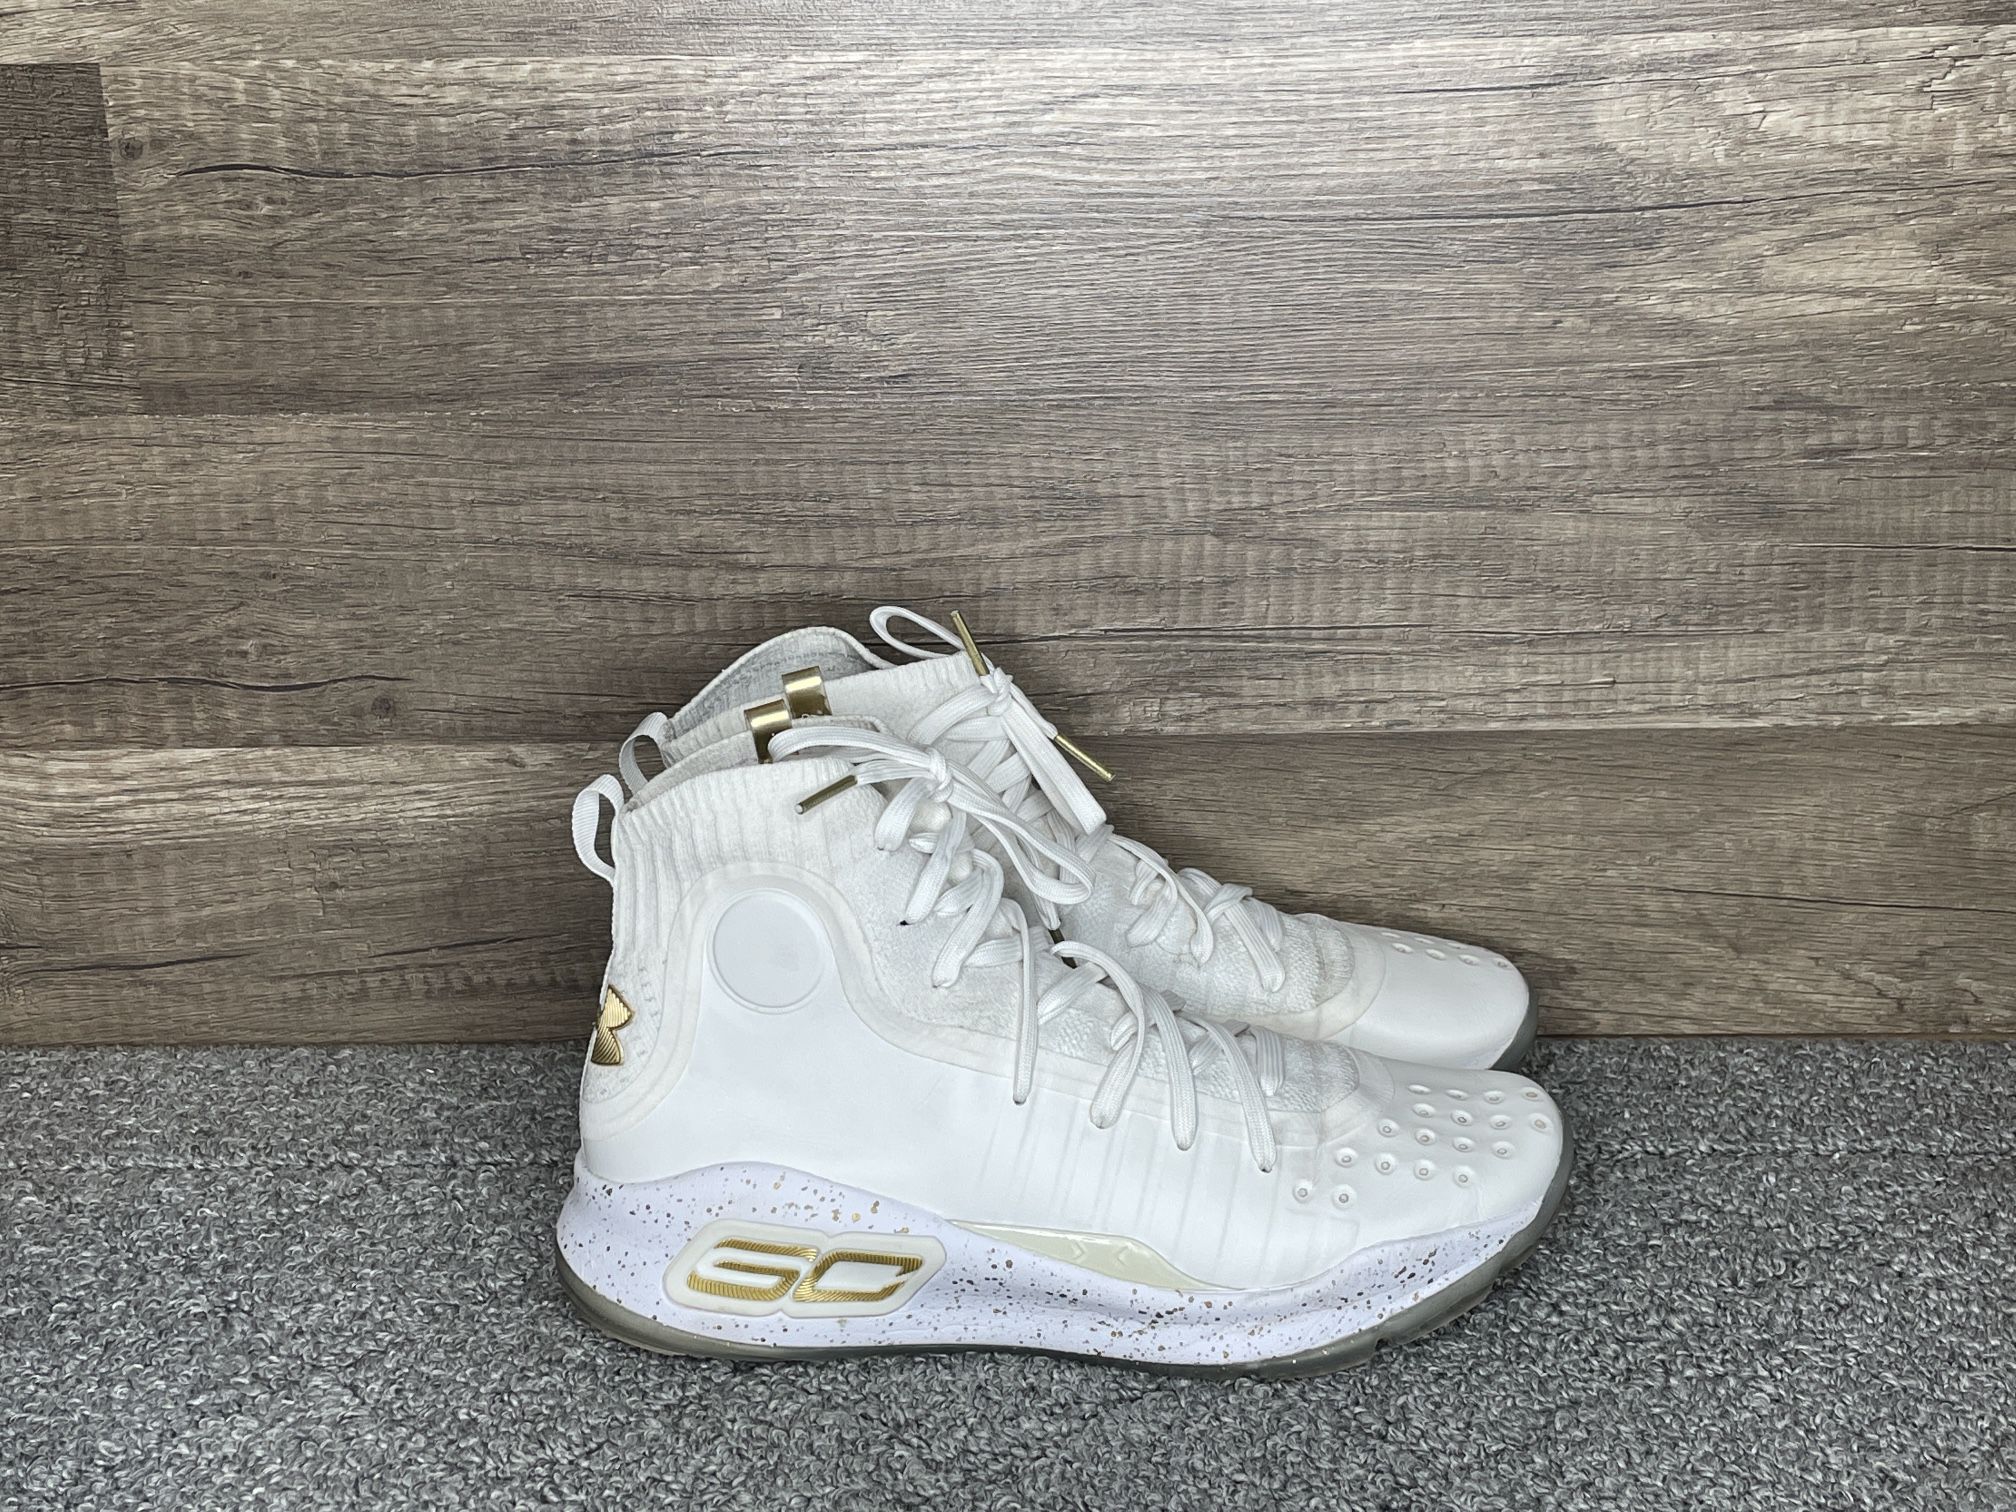 Under Armour GS Curry 4 SIZE 6.5Y Basketball Shoe White Gold 1295995-108 No Box